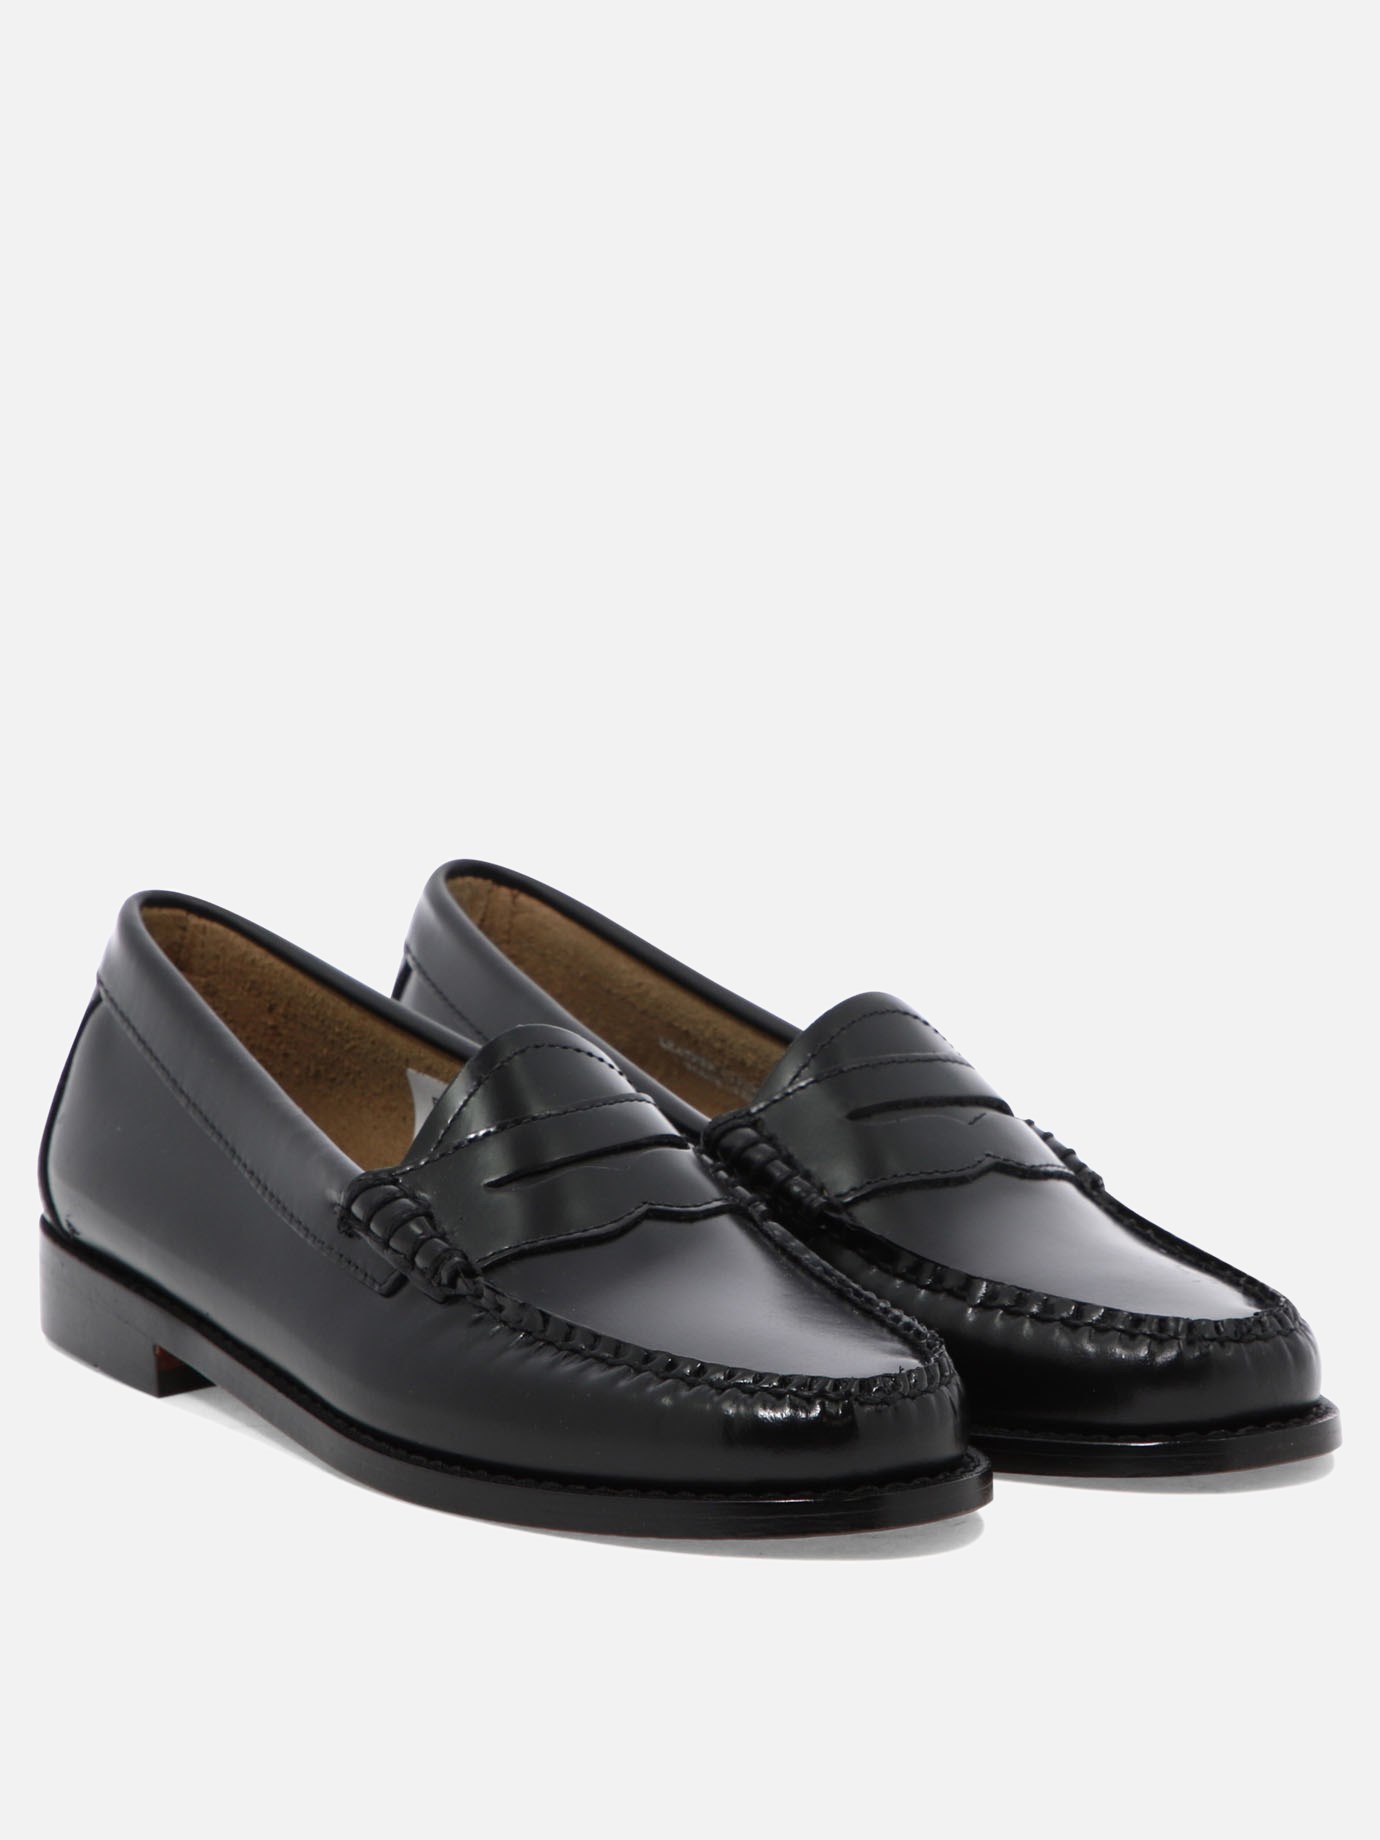 Penny Loafers of G.H. Bass  Co. | Vietti